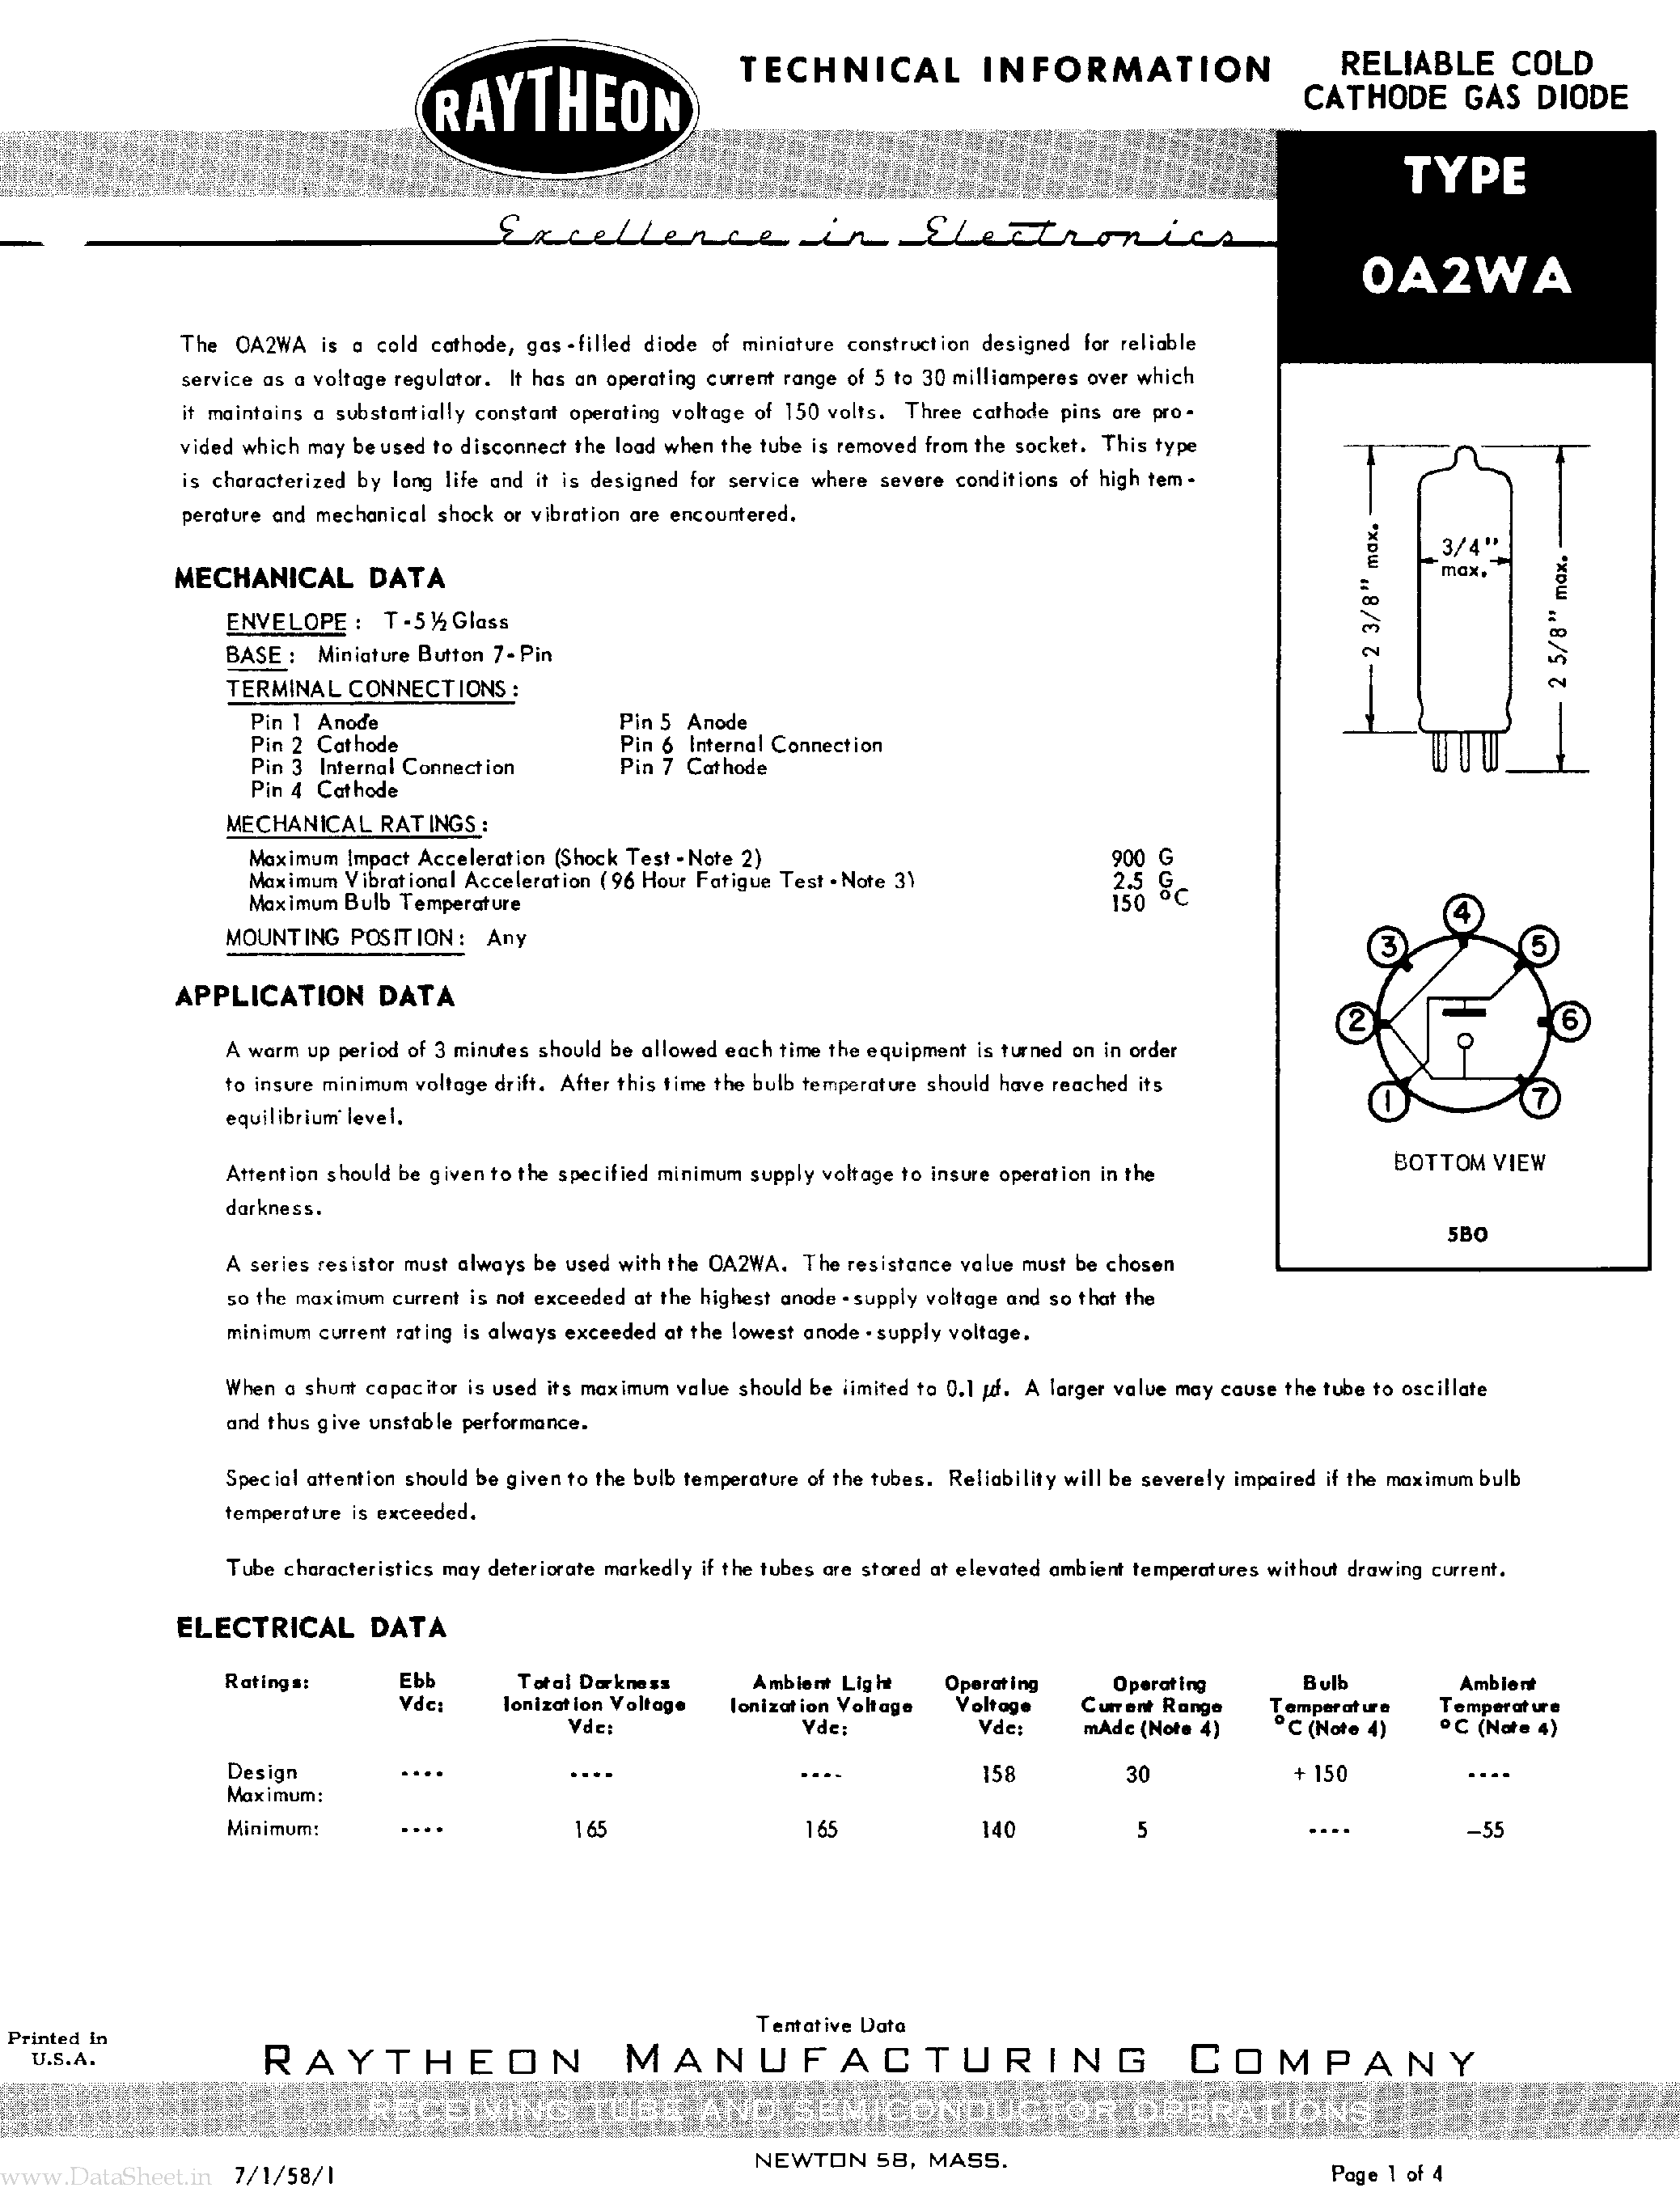 Datasheet 0A2WA - Reliable Cold Cathode Gas Diode page 1